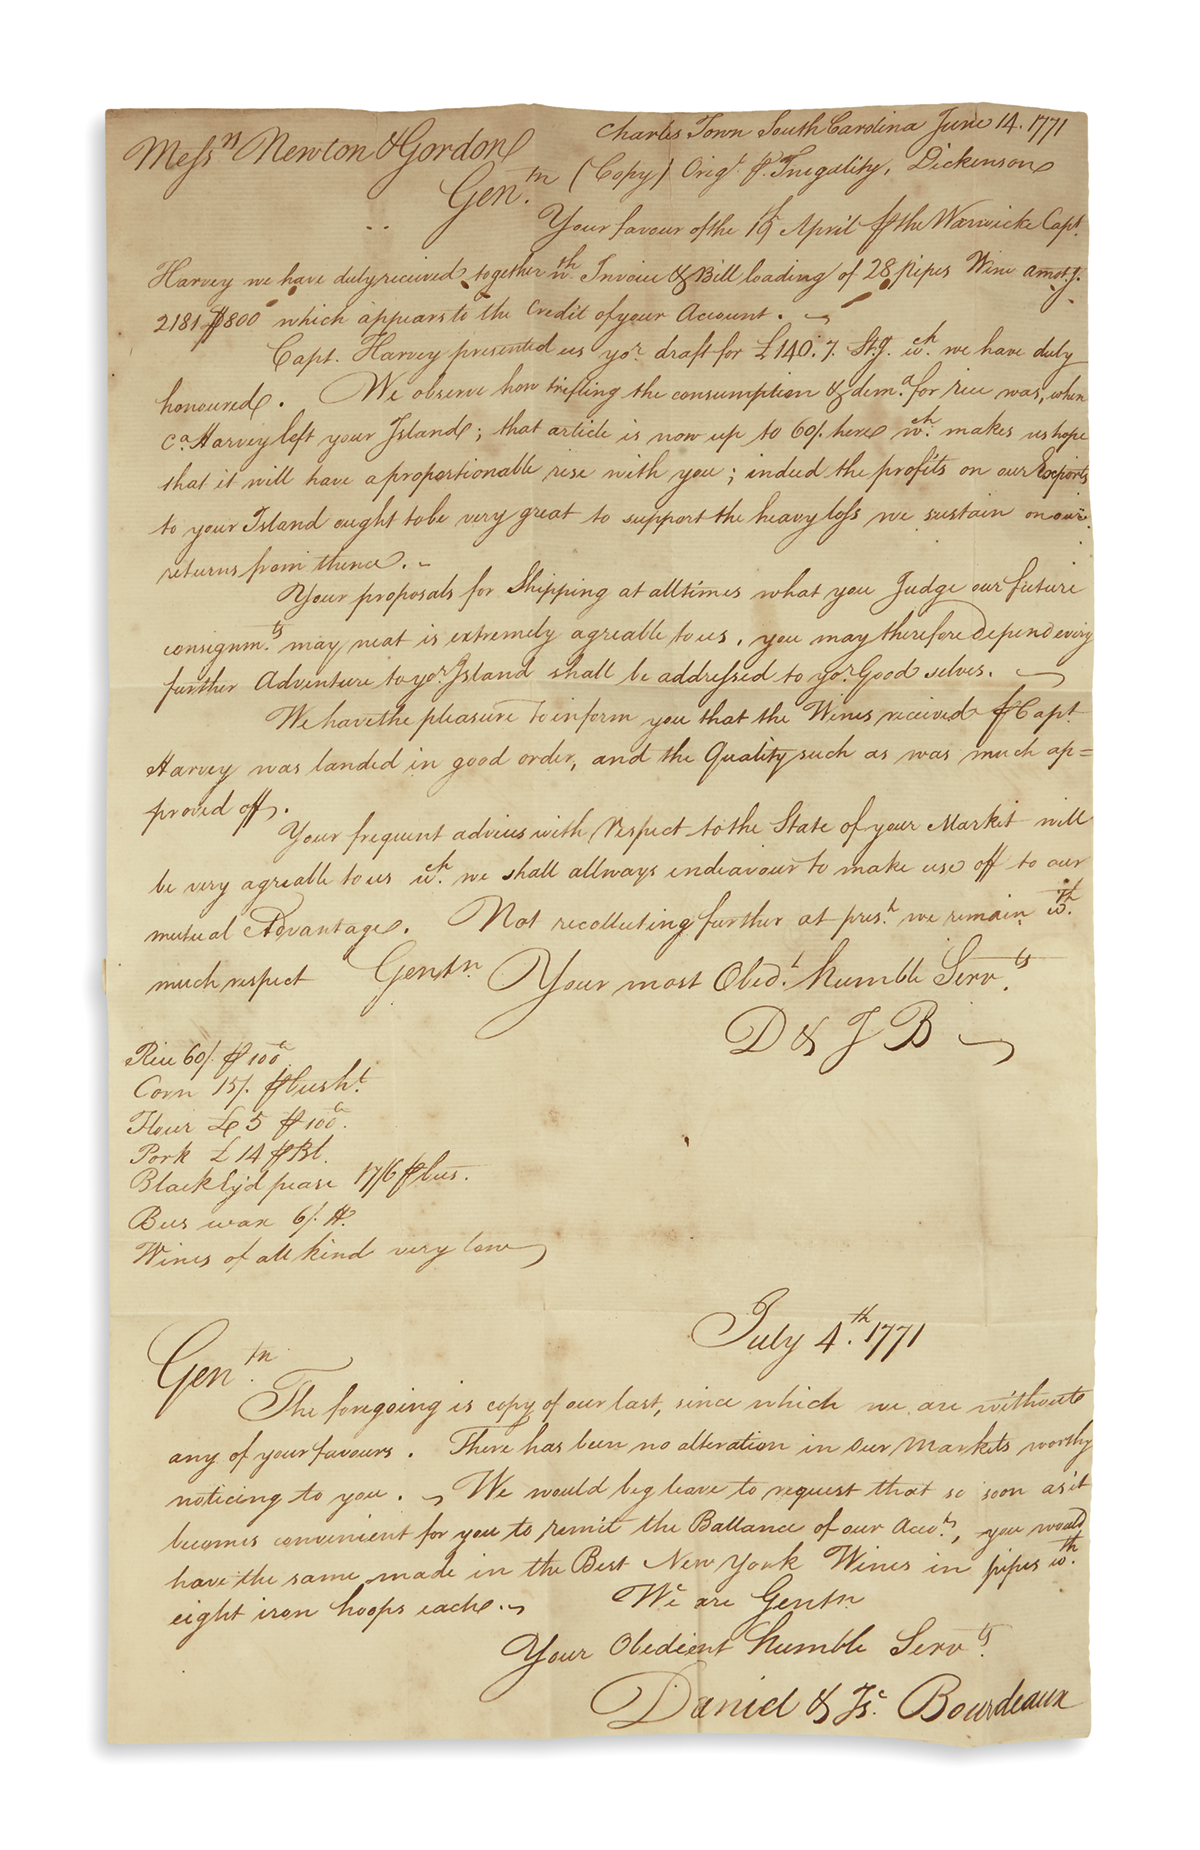 (AMERICAN REVOLUTION--PRELUDE.) Corrie, John. Letter describing the implementation of the Stamp Act in South Carolina.